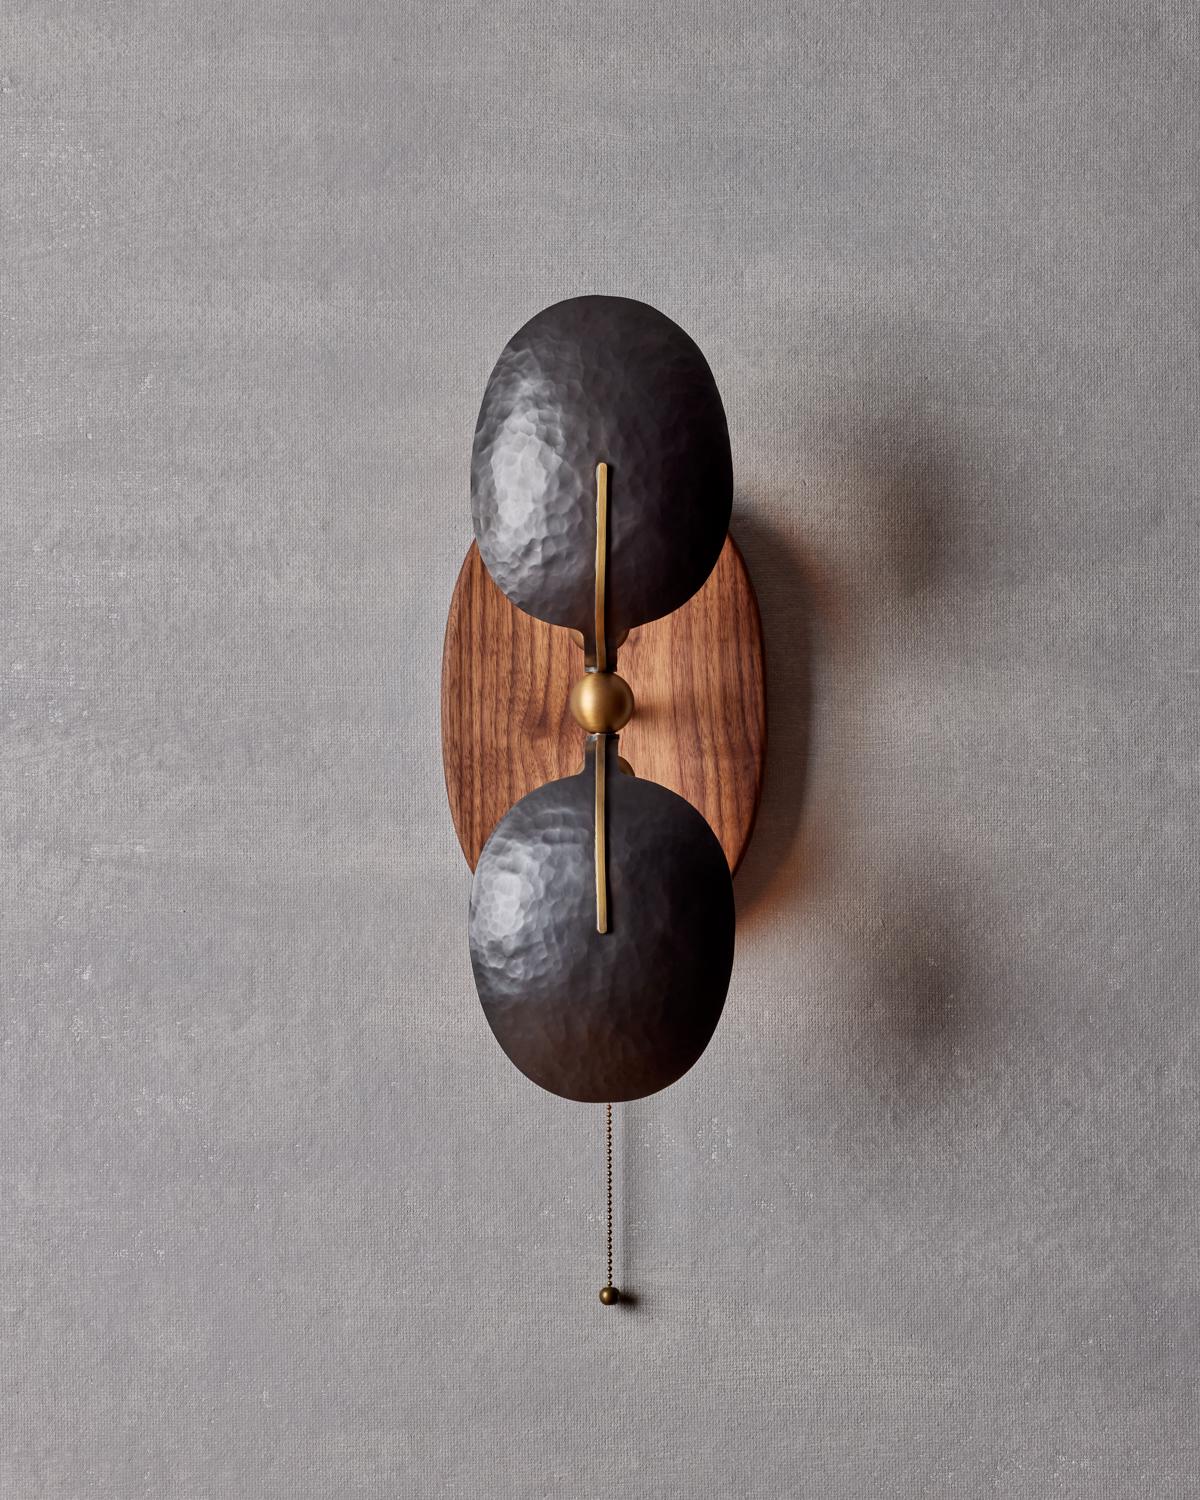 The Greta Sconce mounted from a slightly concave walnut backplate is accented with two bench-made bronze reflectors and oval brass sockets.

OVERALL DIMENSIONS
7.75